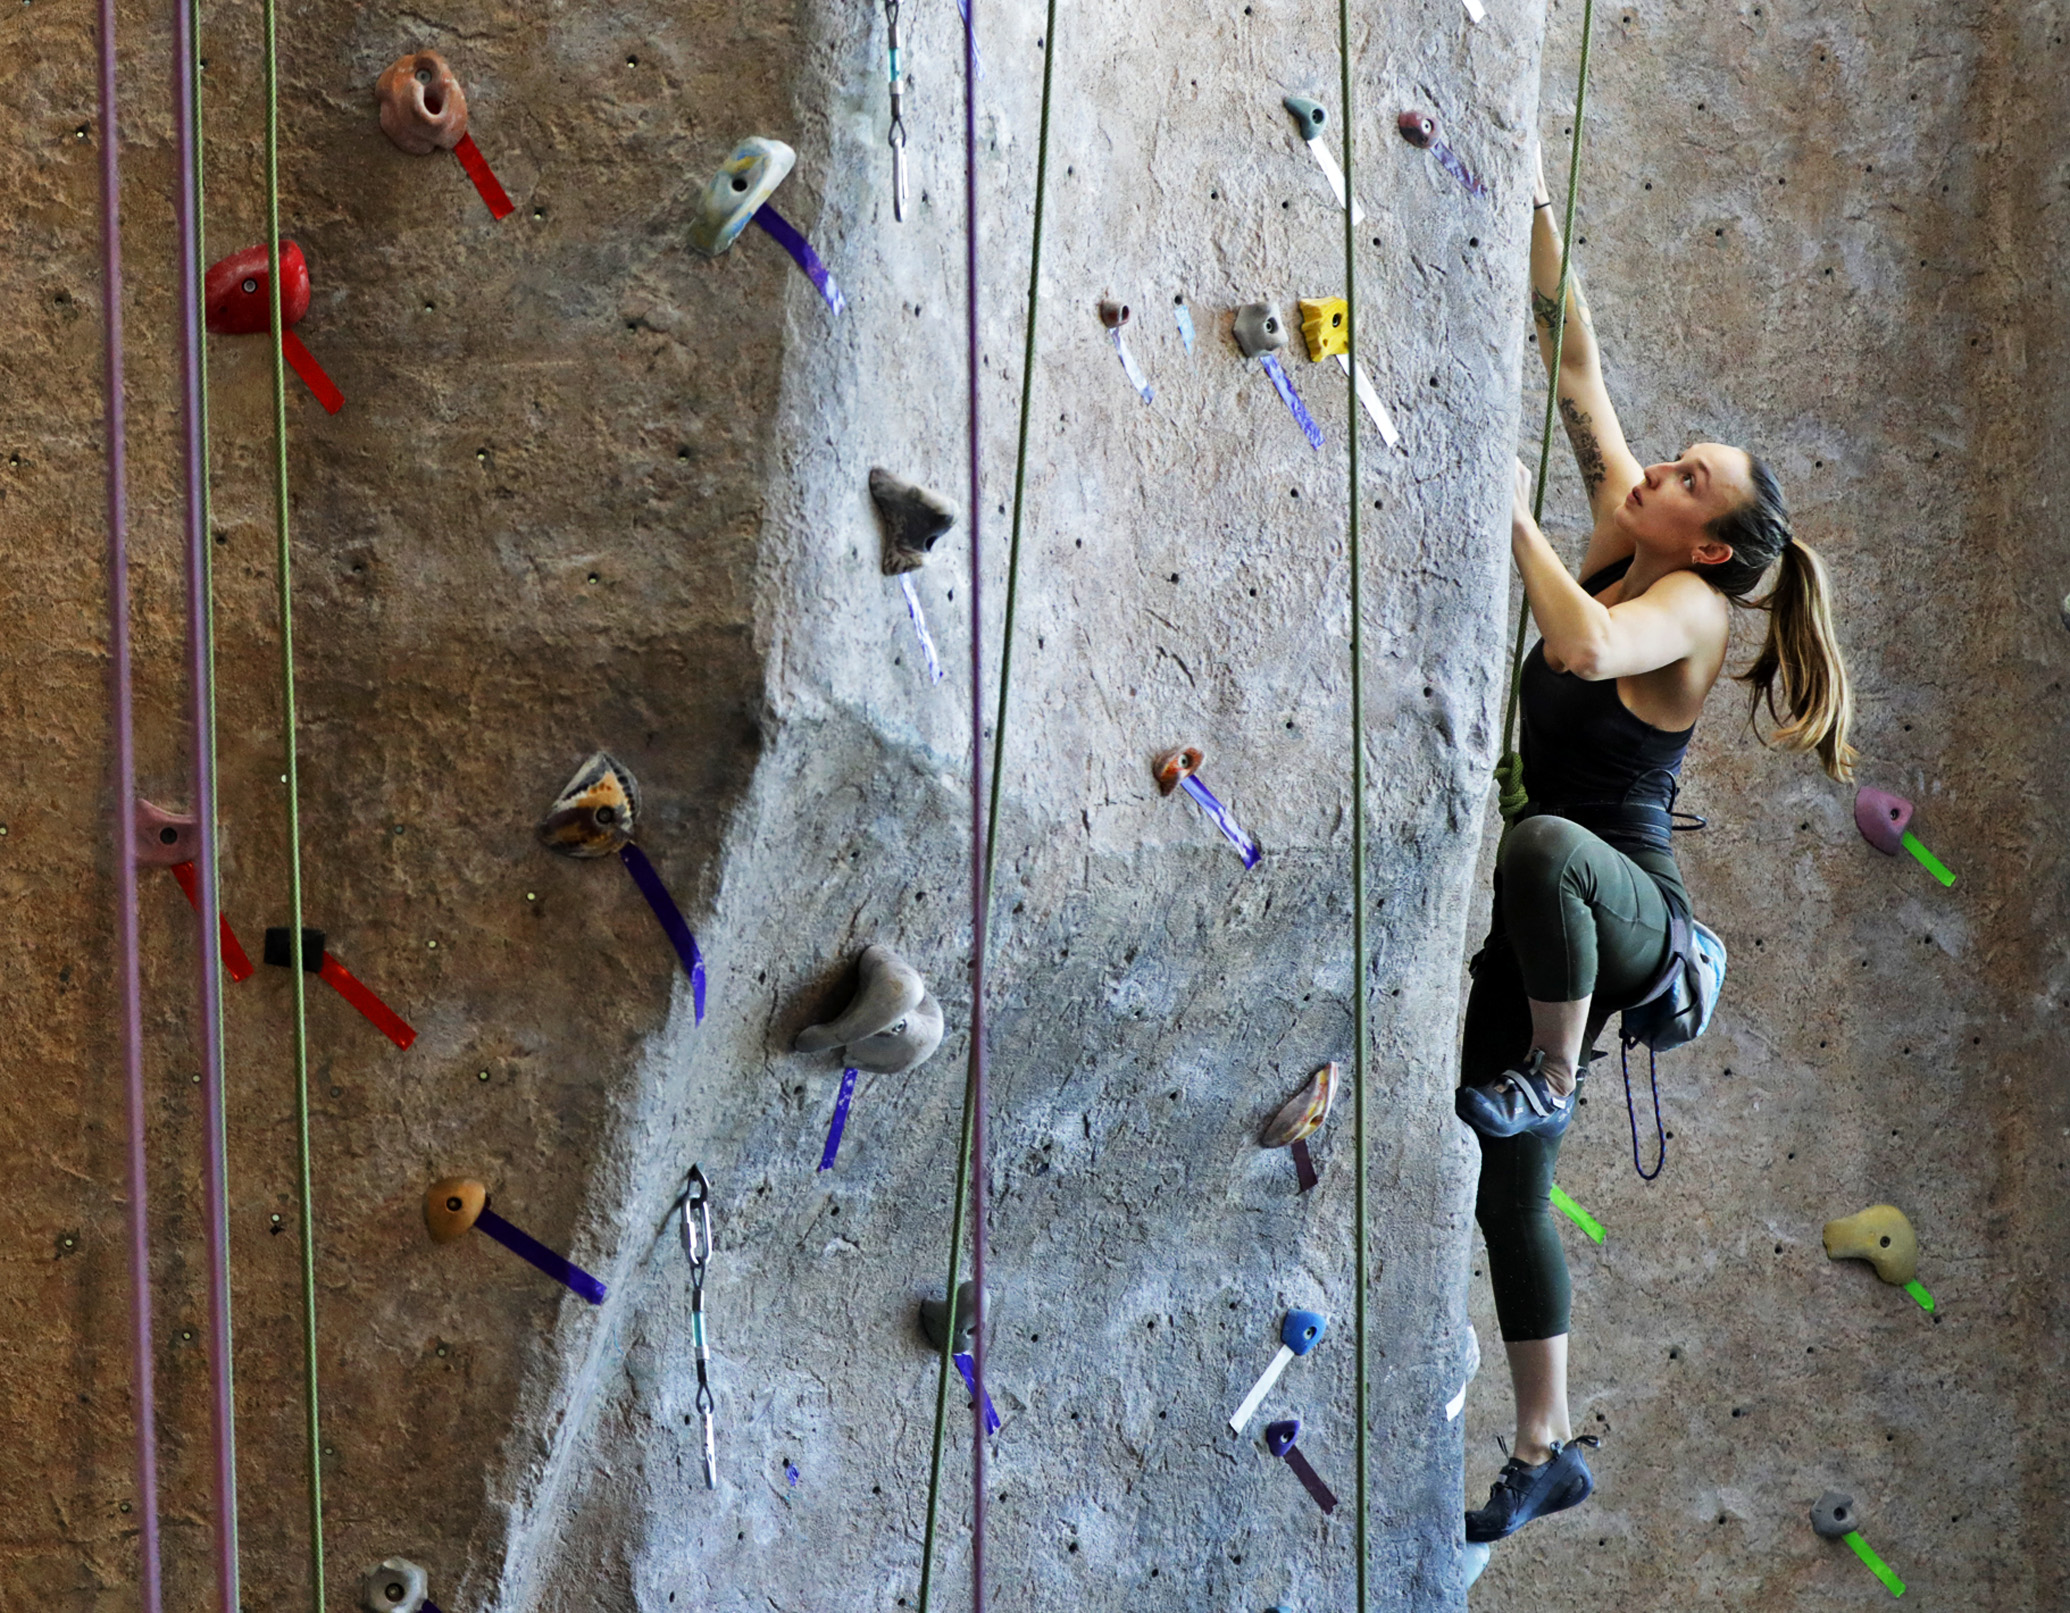  Sierra McMurry scales a route on the rock wall early in the Rock the Rec climbing competition held at the University of Montana Fitness and Recreation Center in Missoula, Mont., on Sunday, March 10, 2019. Each of the routes put up for Sunday's compe